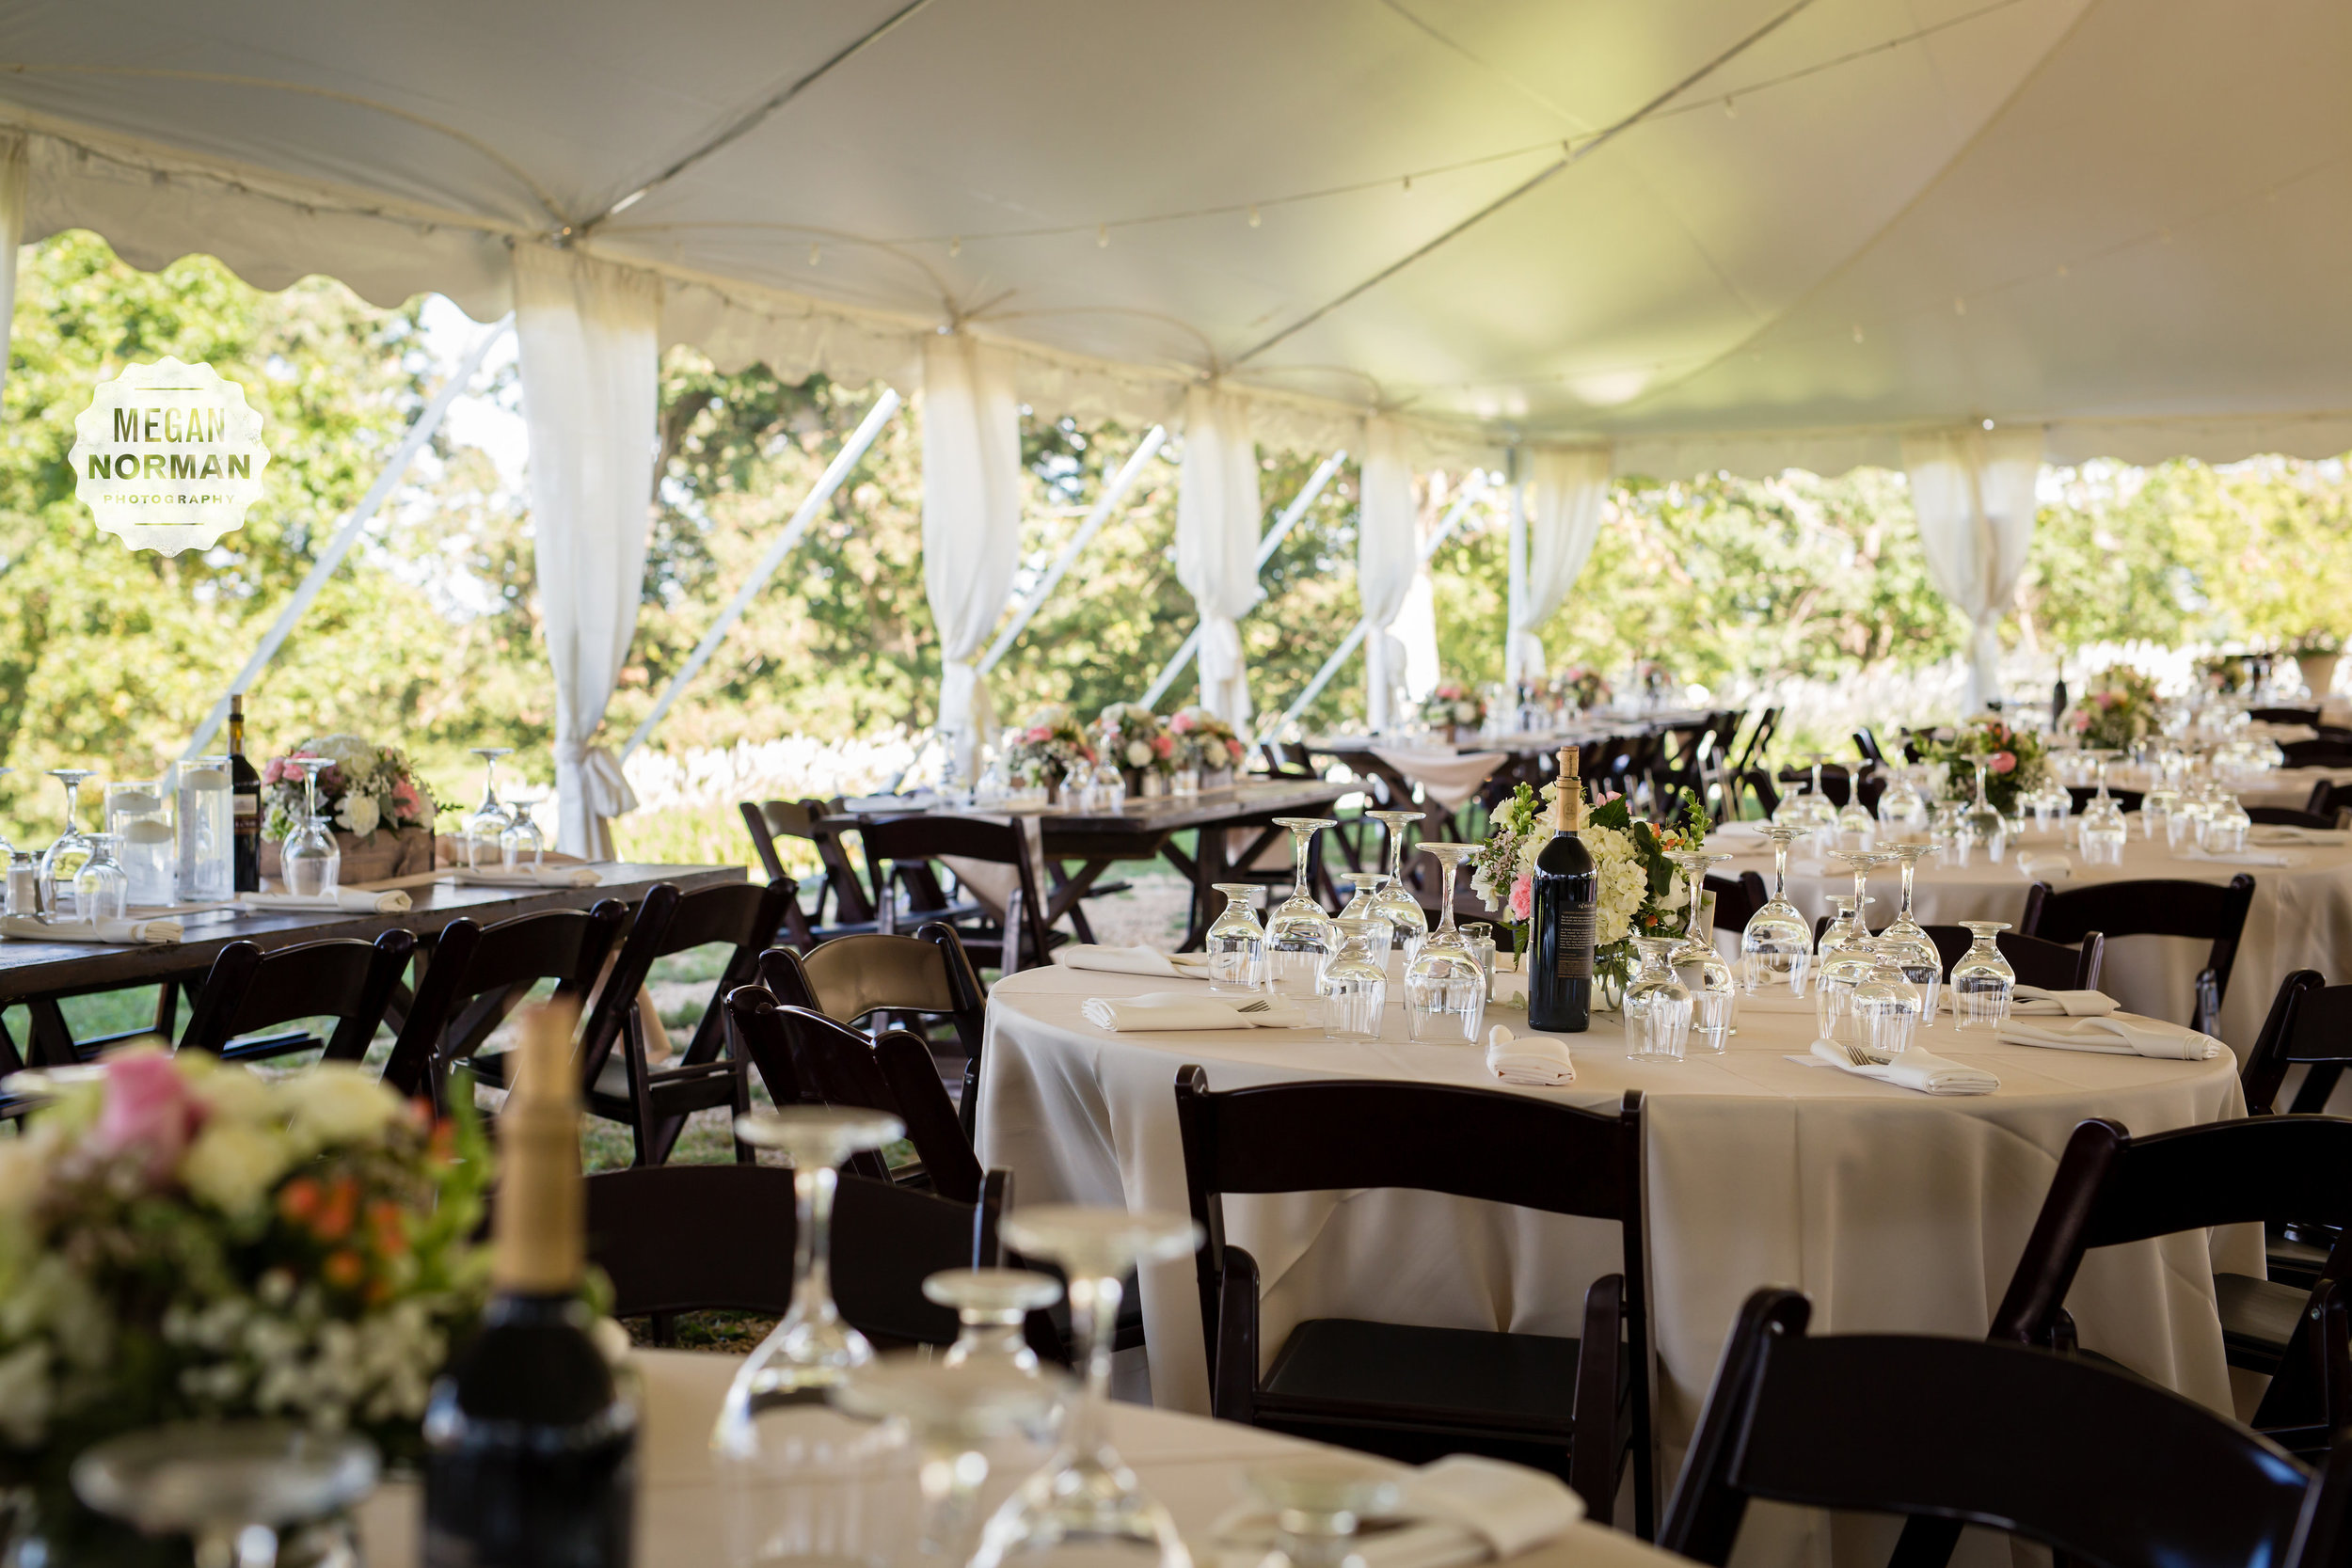   Worry-free wedding rentals    From start to finish.  